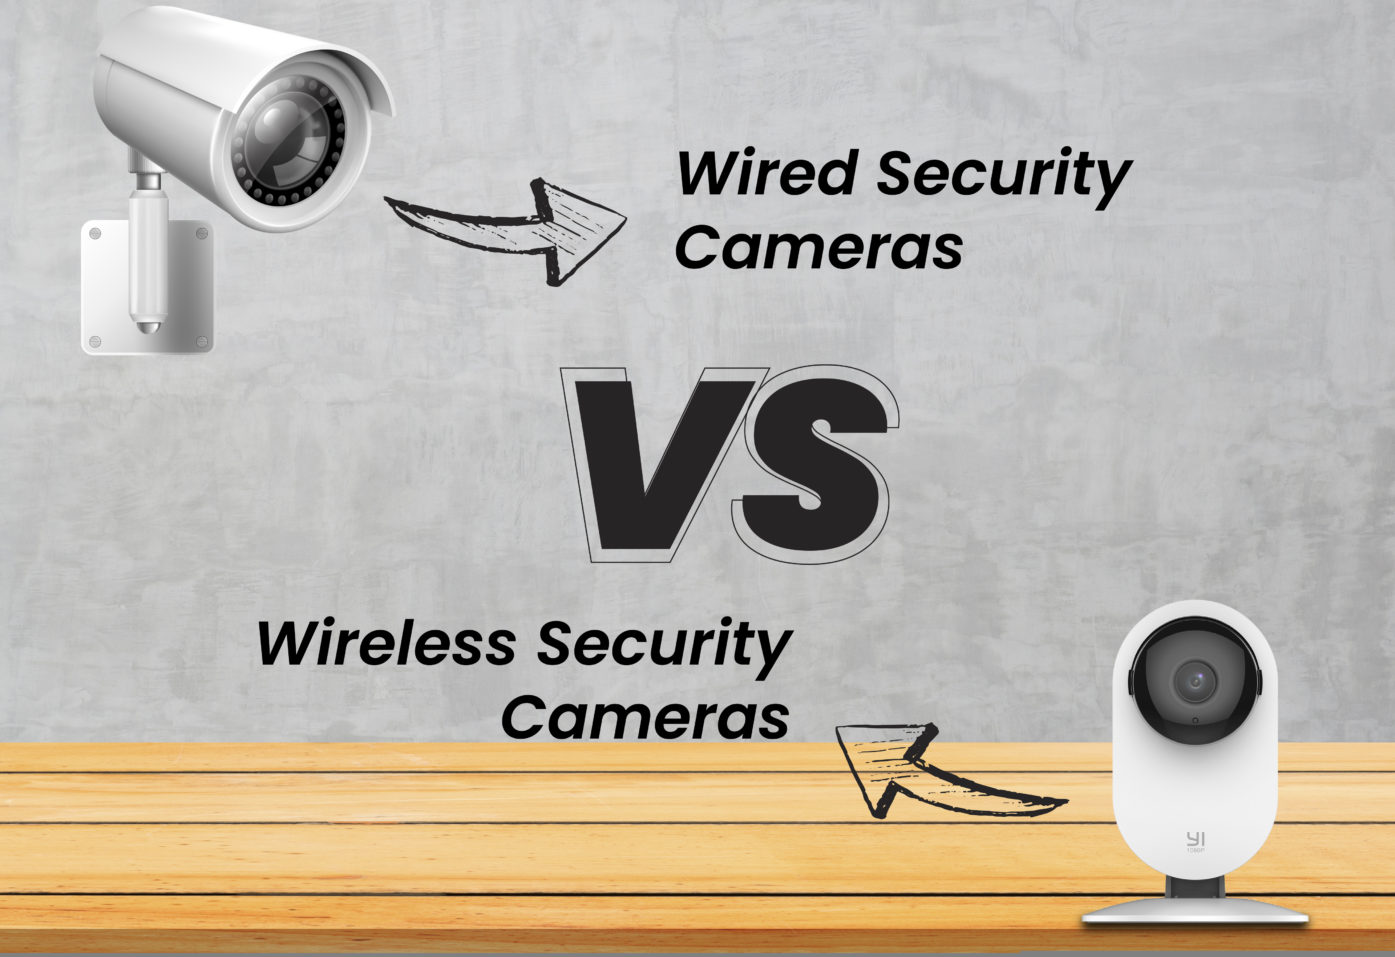 What's Better: Wireless or Wired Security Cameras?